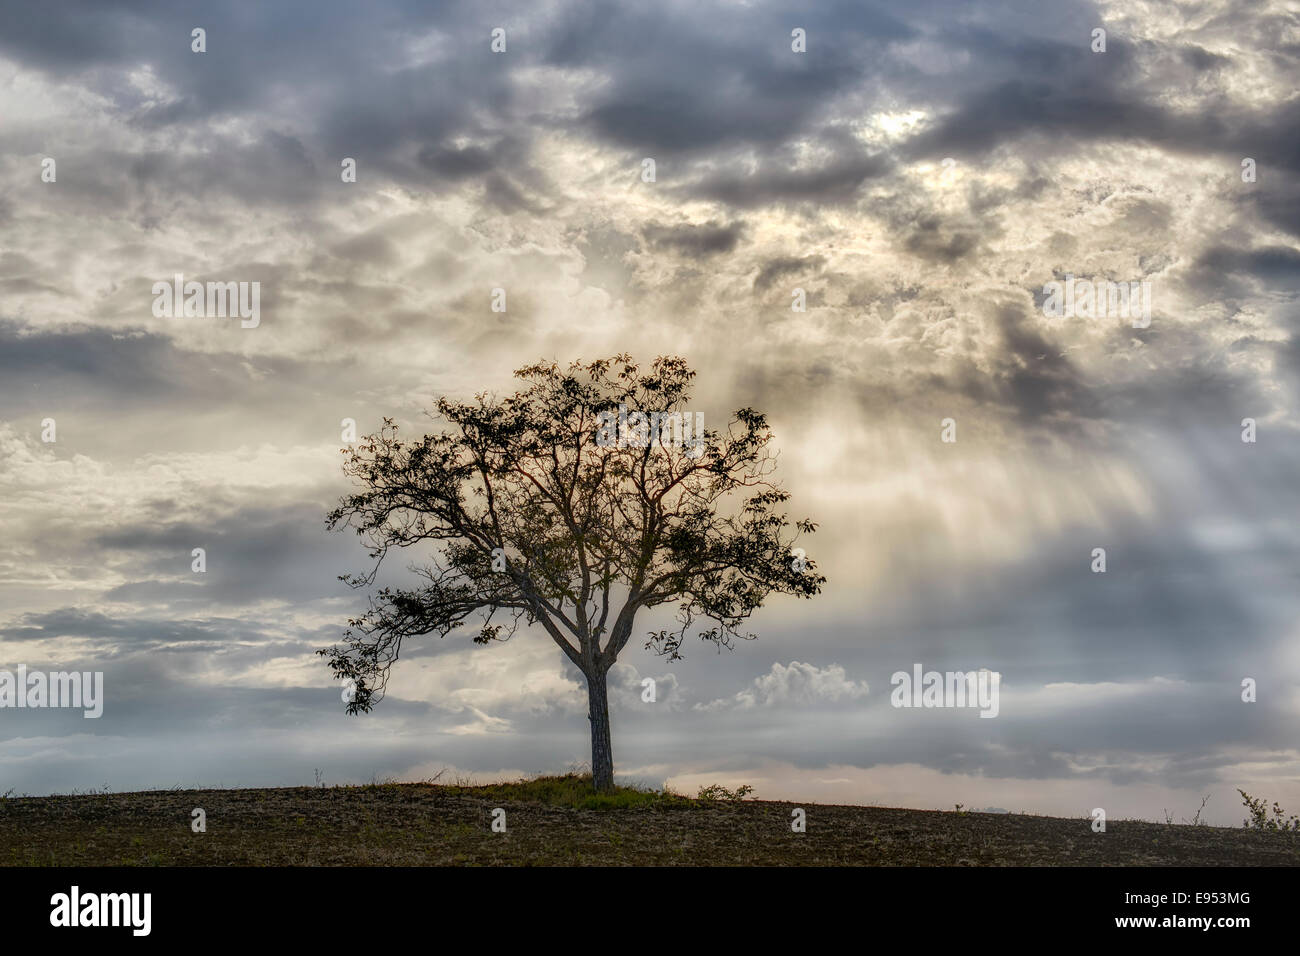 Solitary tree on a field, sun rays breaking through the clouds, Pienza, Tuscany, Italy Stock Photo